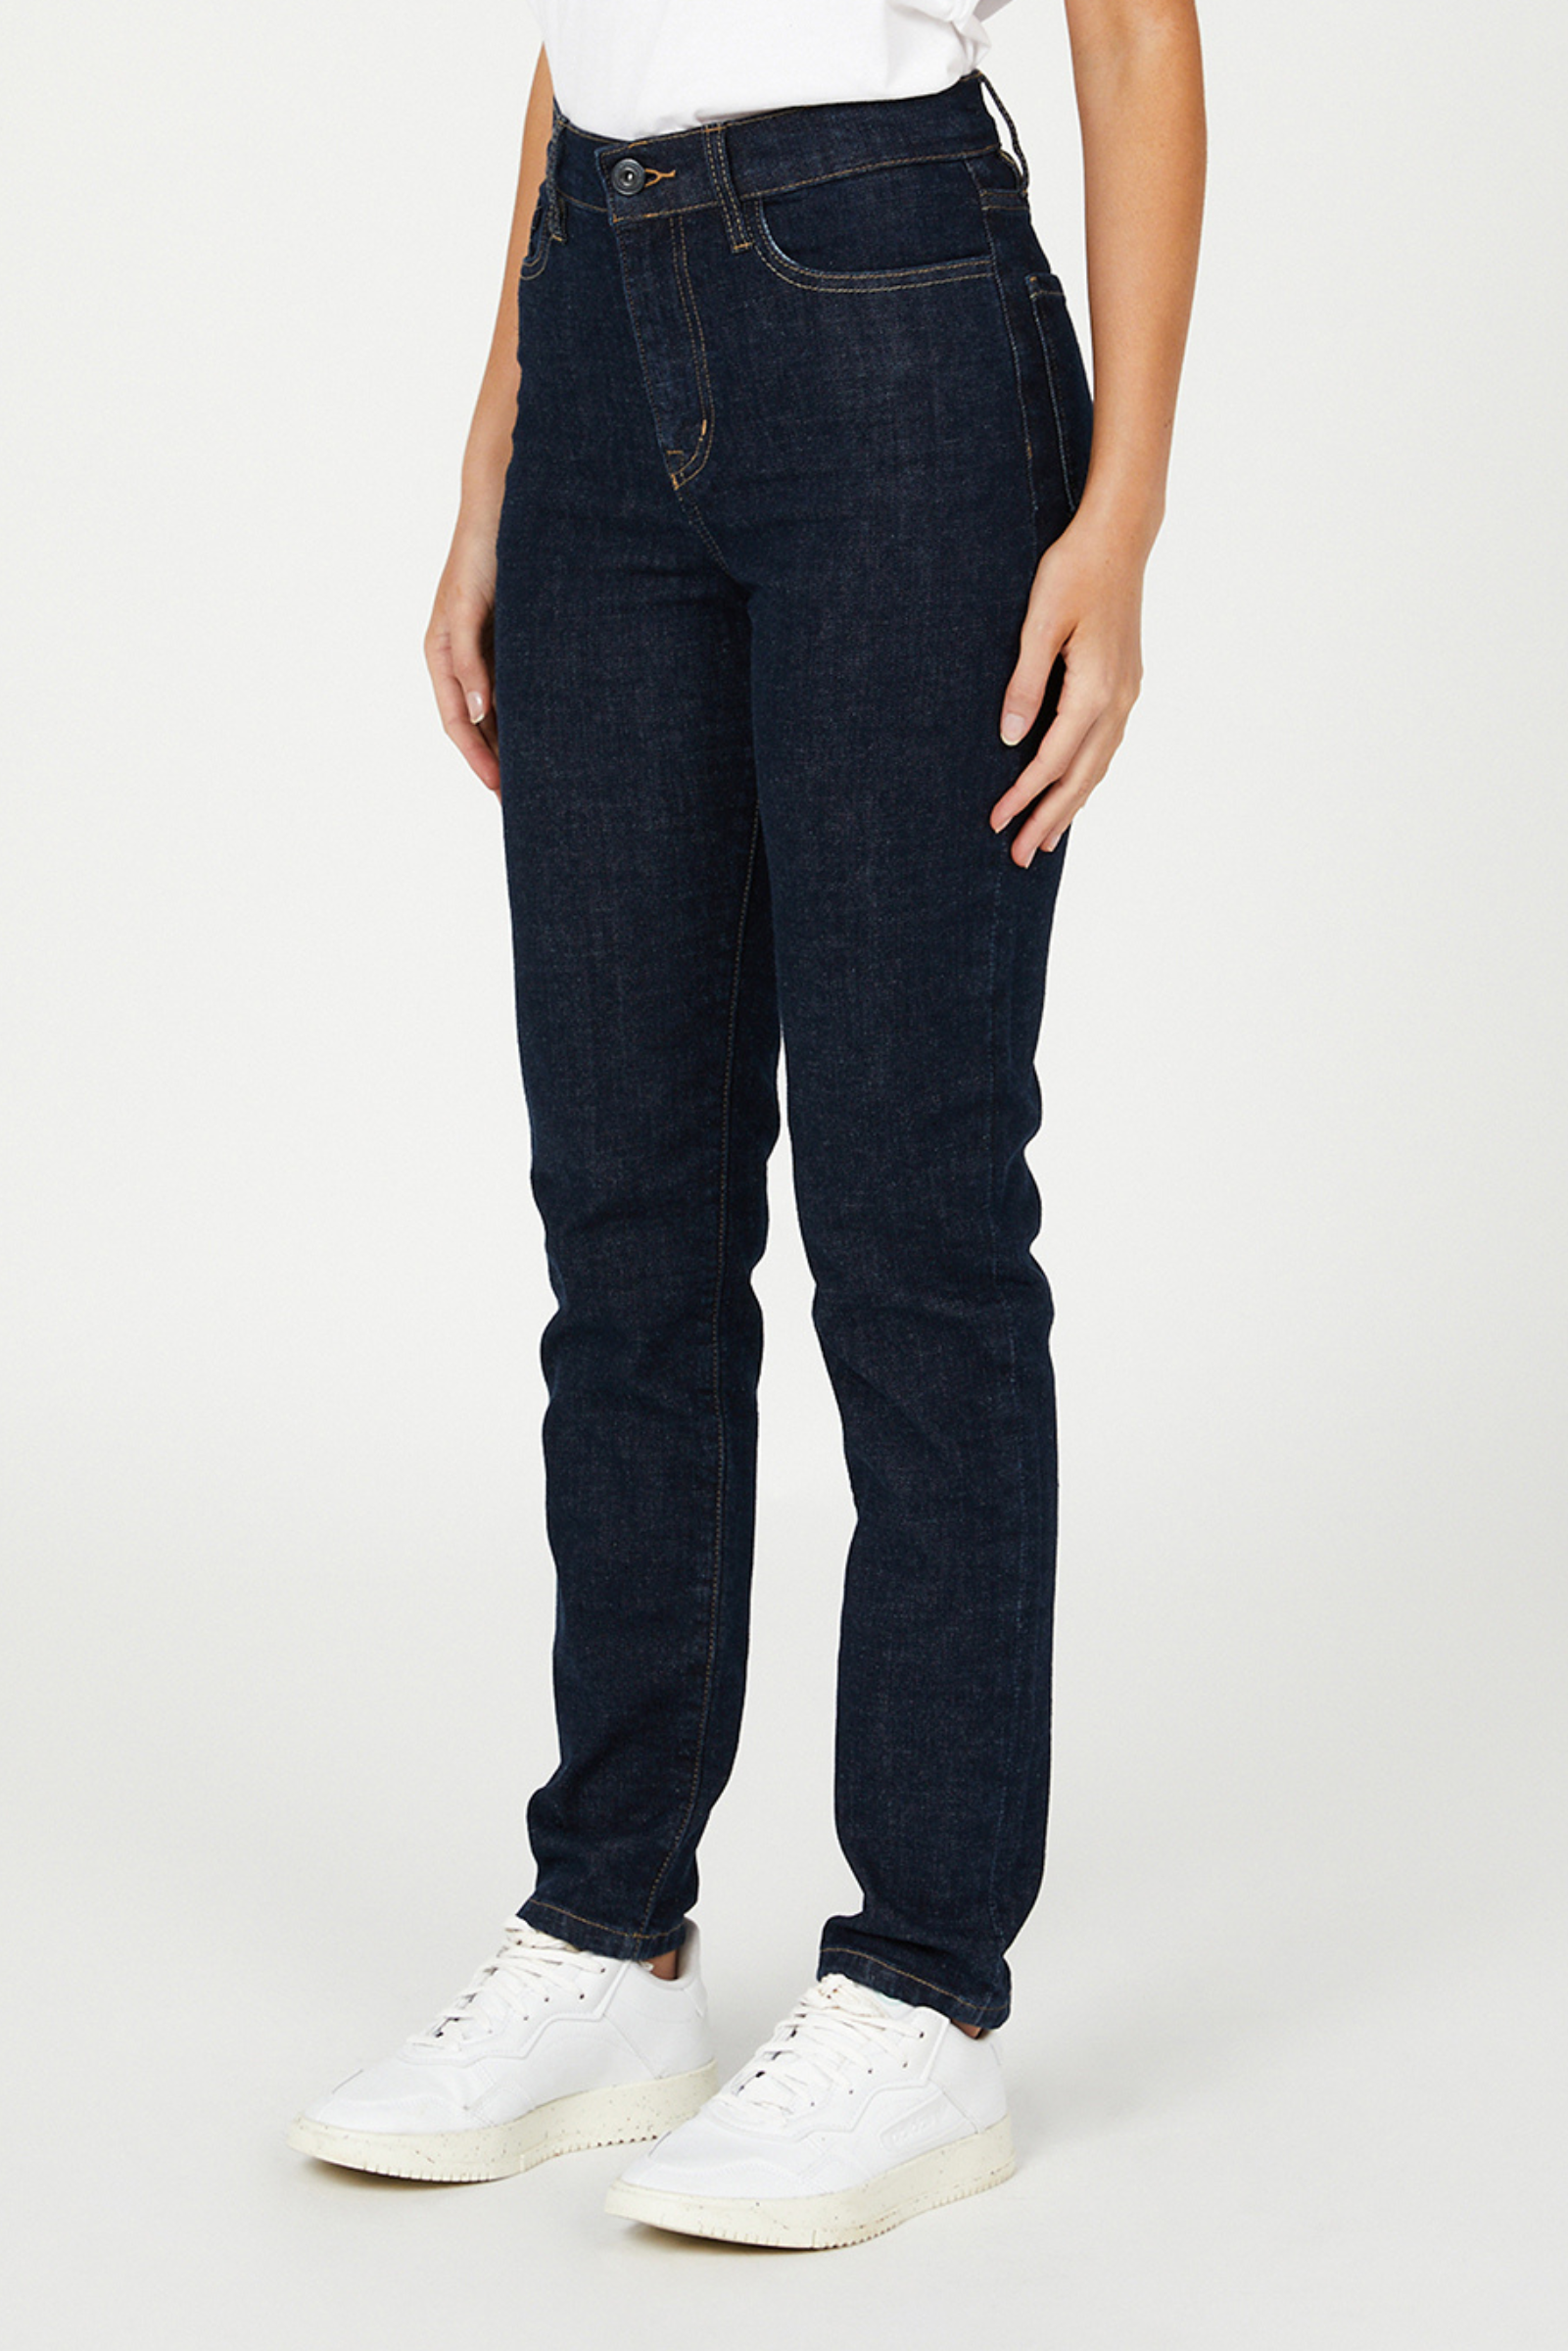 Outland Lucy Jeans - Stellar